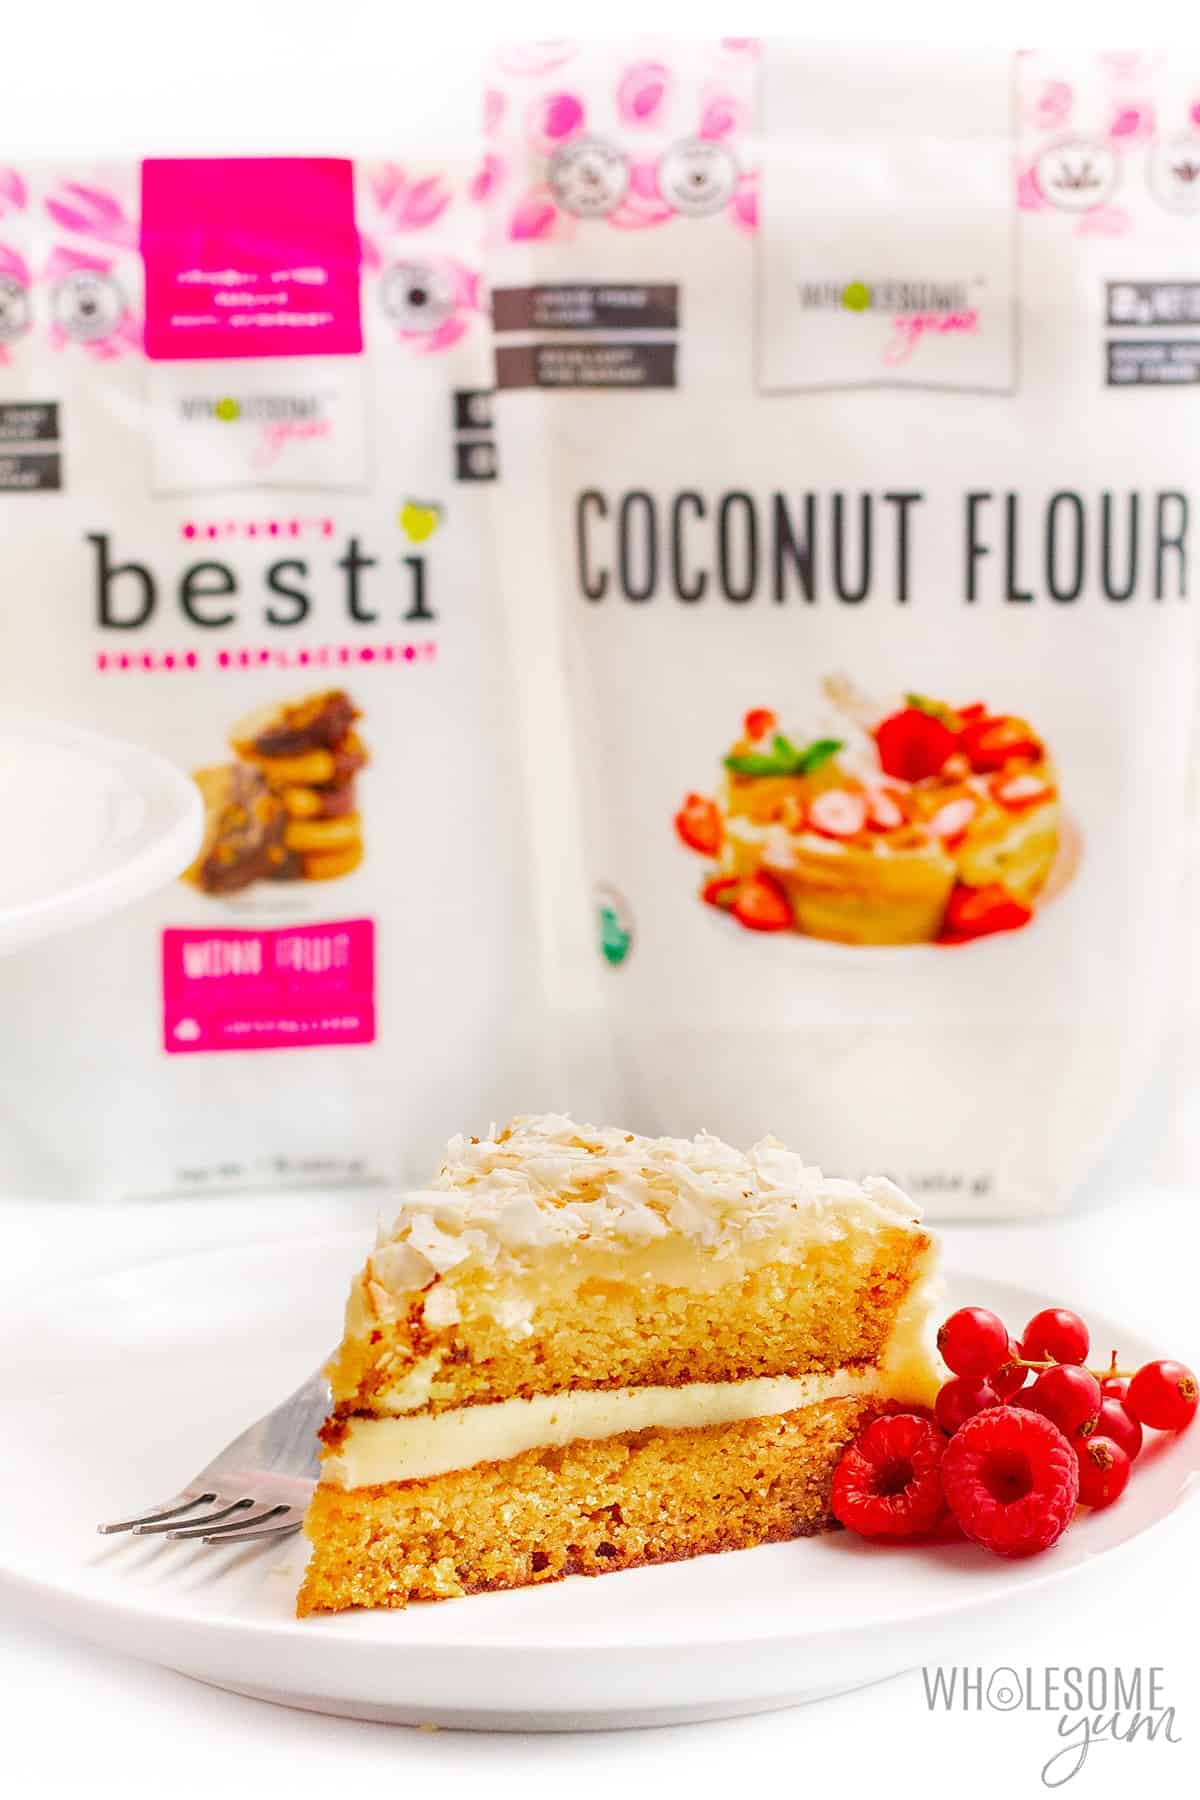 Slice of coconut cake with coconut flour and Besti in the background.